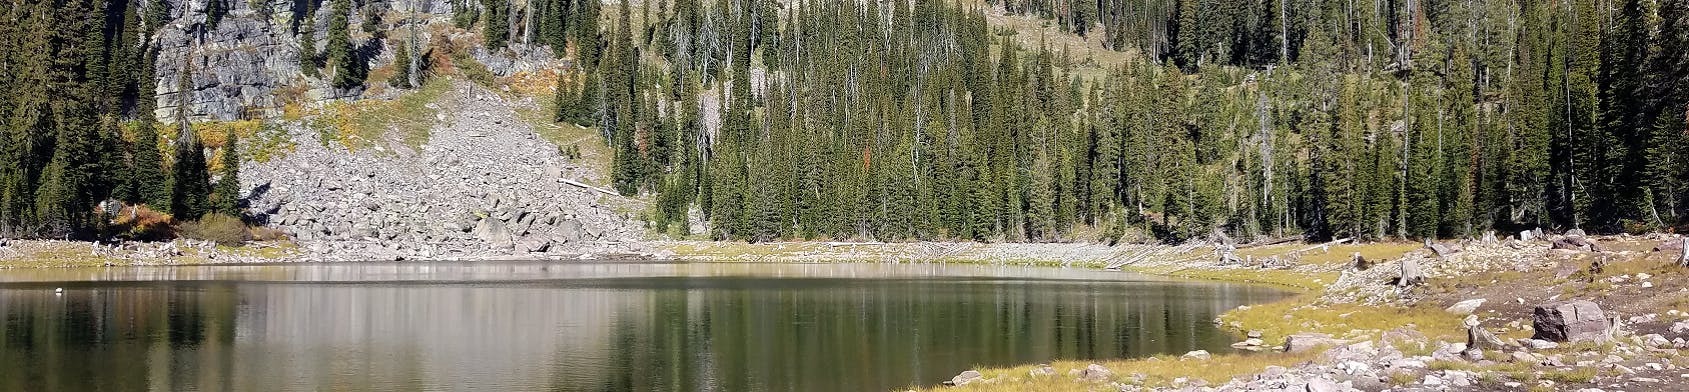 Sheridan Lake, one of the Rattlesnake Wilderness lakes acquired by the City of Missoula in 2017 through its purchase of the Mountain Water Company. The City maintains the lake's dam infrastructure.